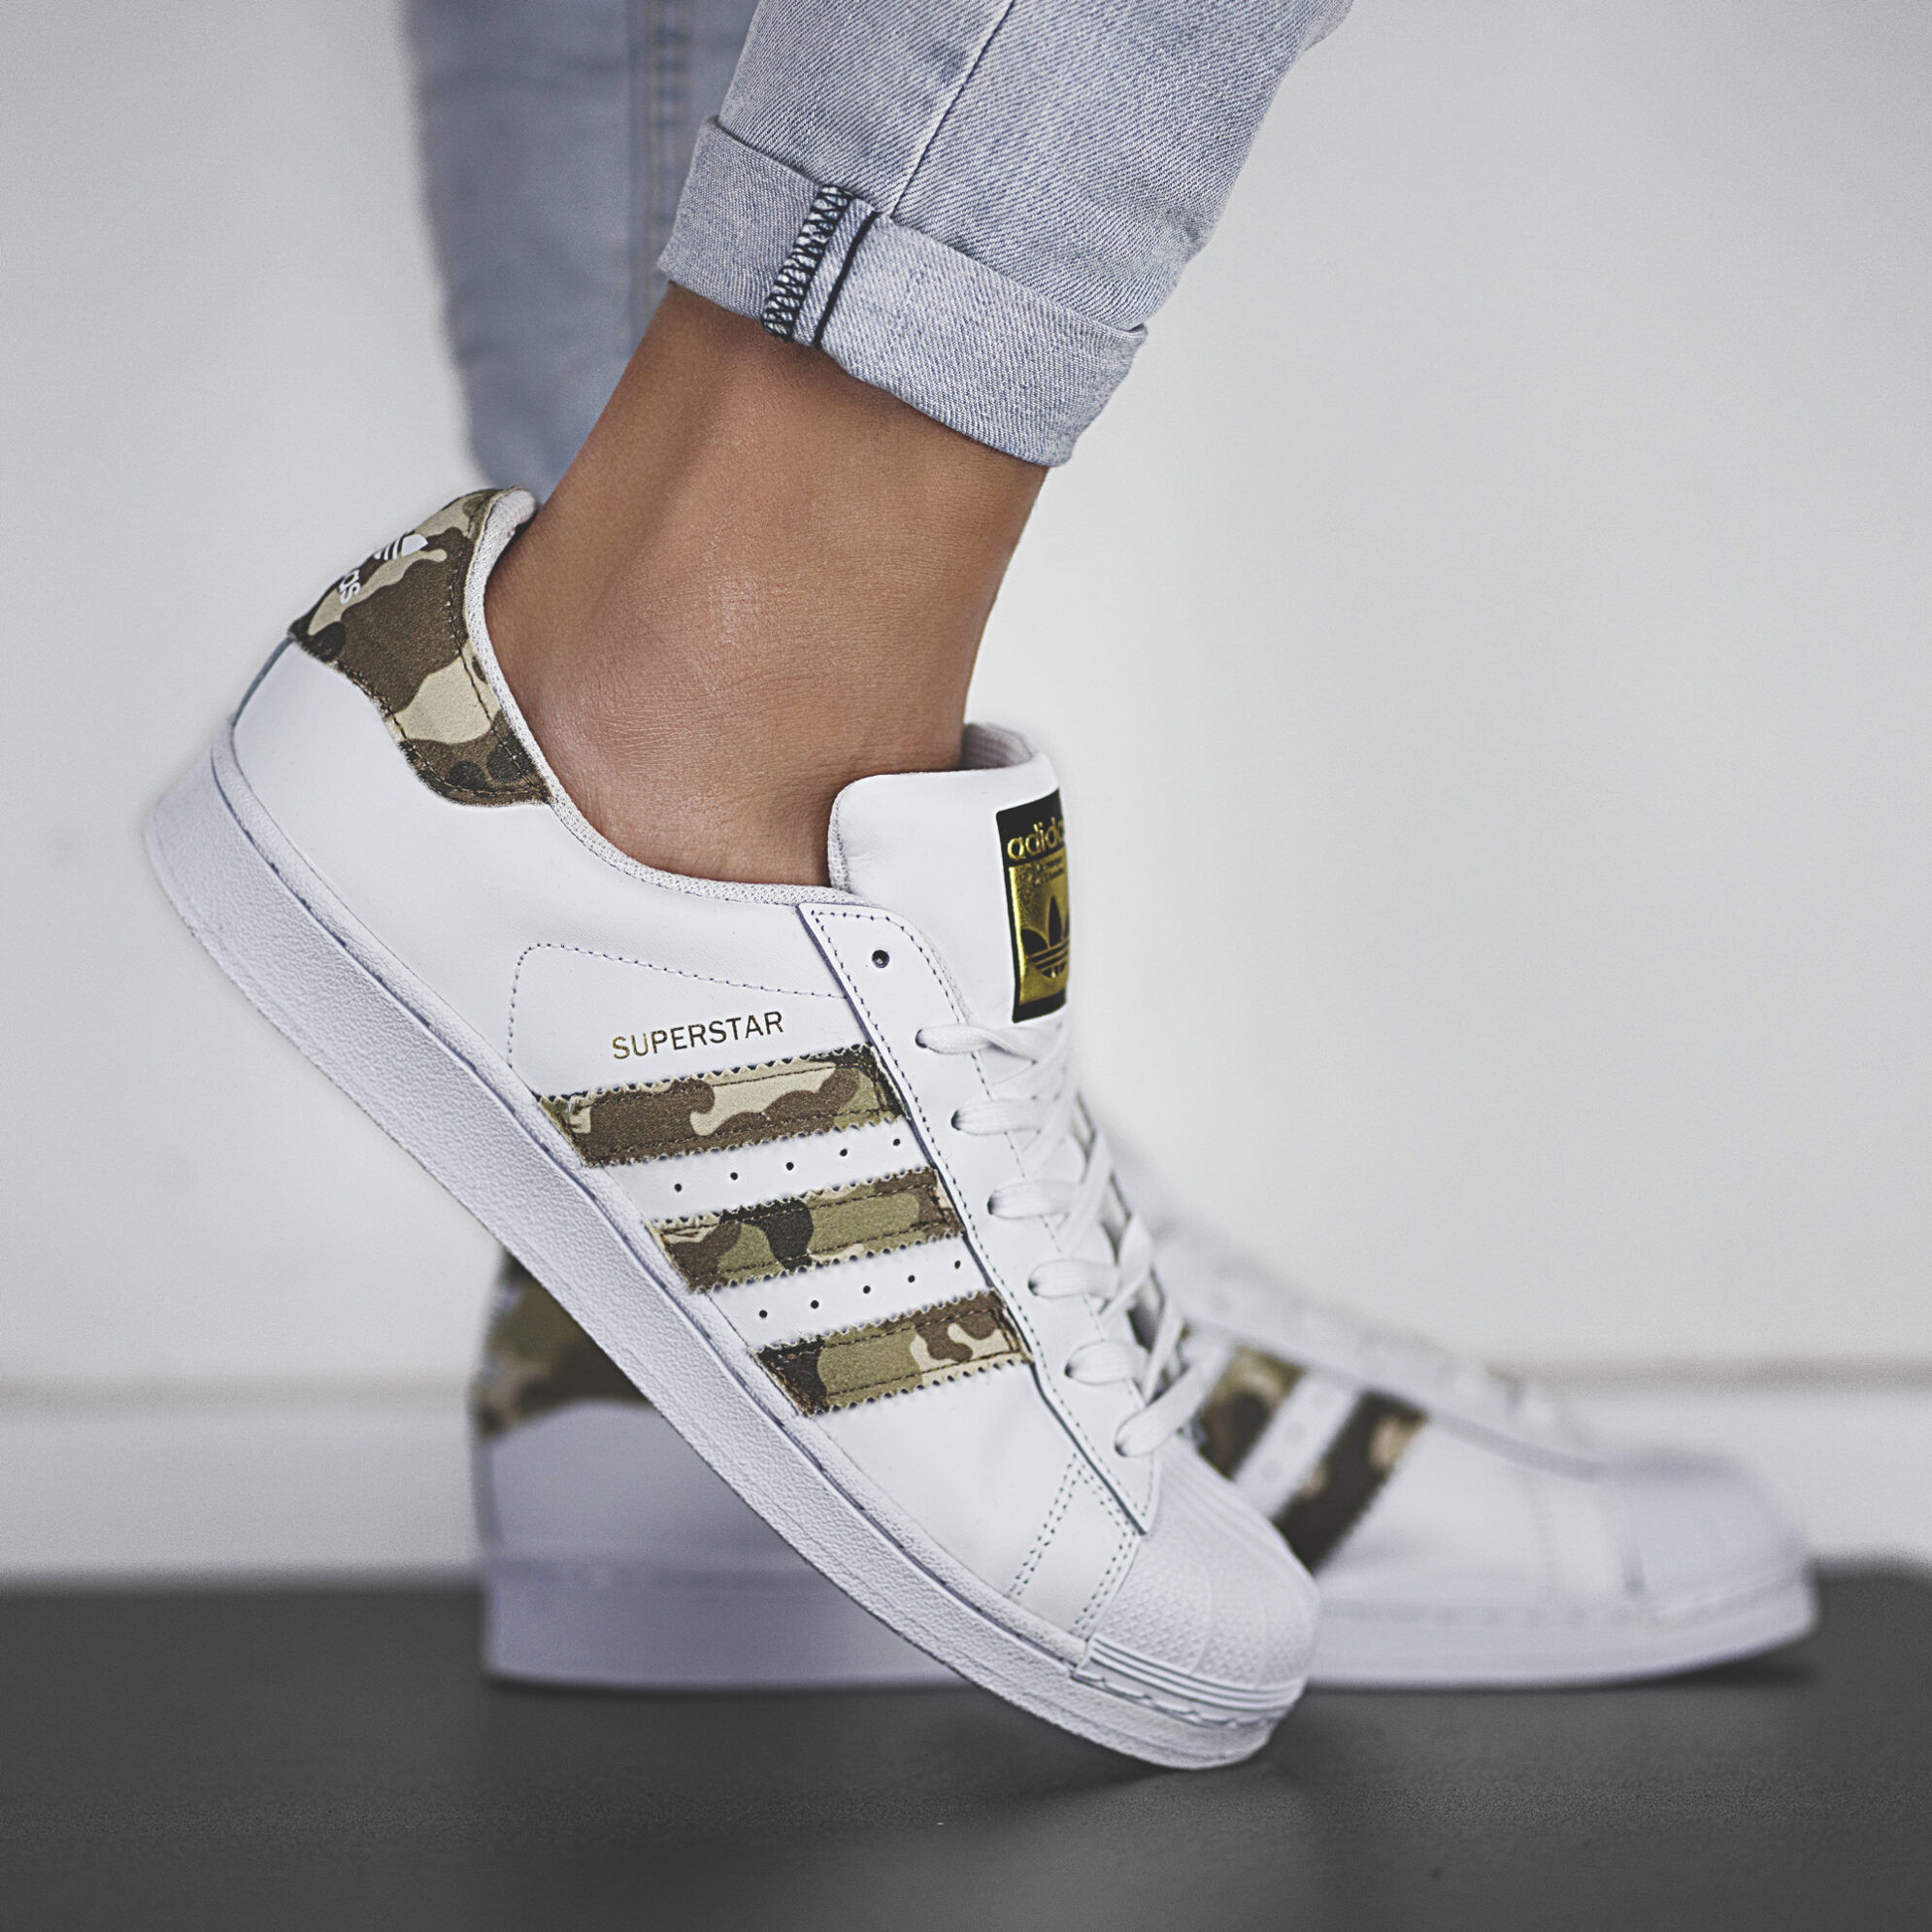 superstar always adidas sneakers personalizzate camouflage da dressed